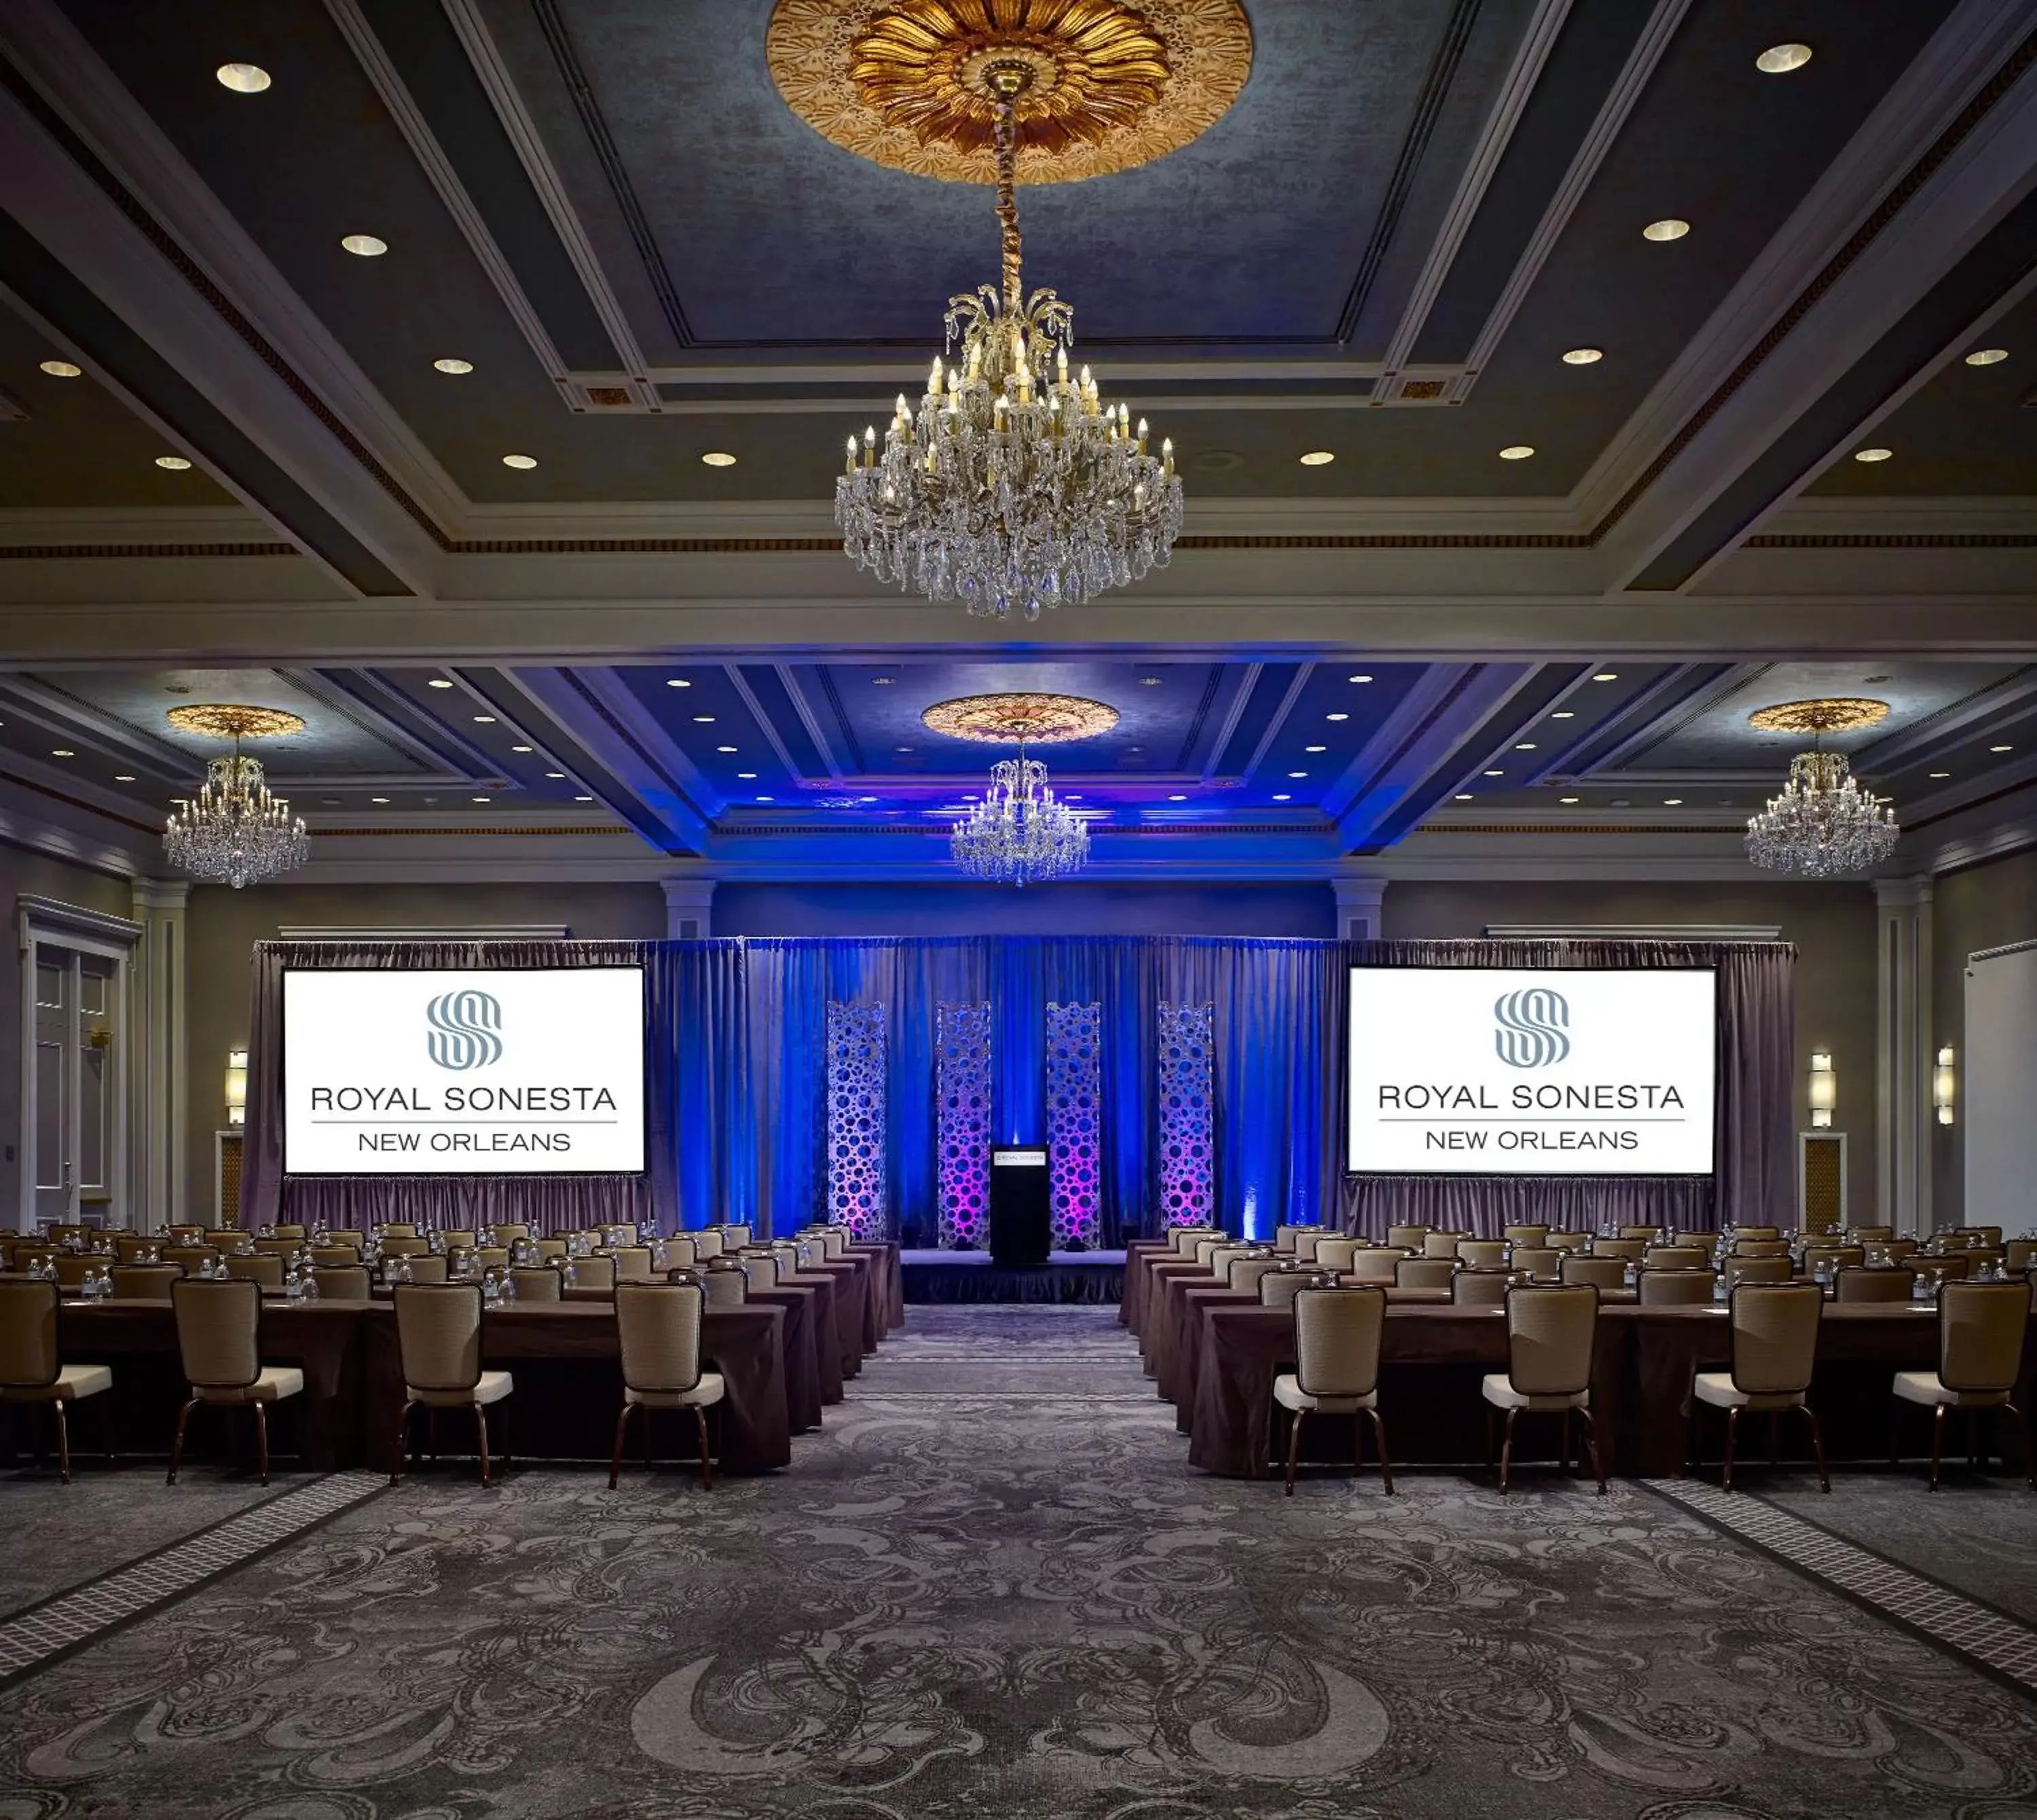 On site, Banquet Facilities in The Royal Sonesta New Orleans